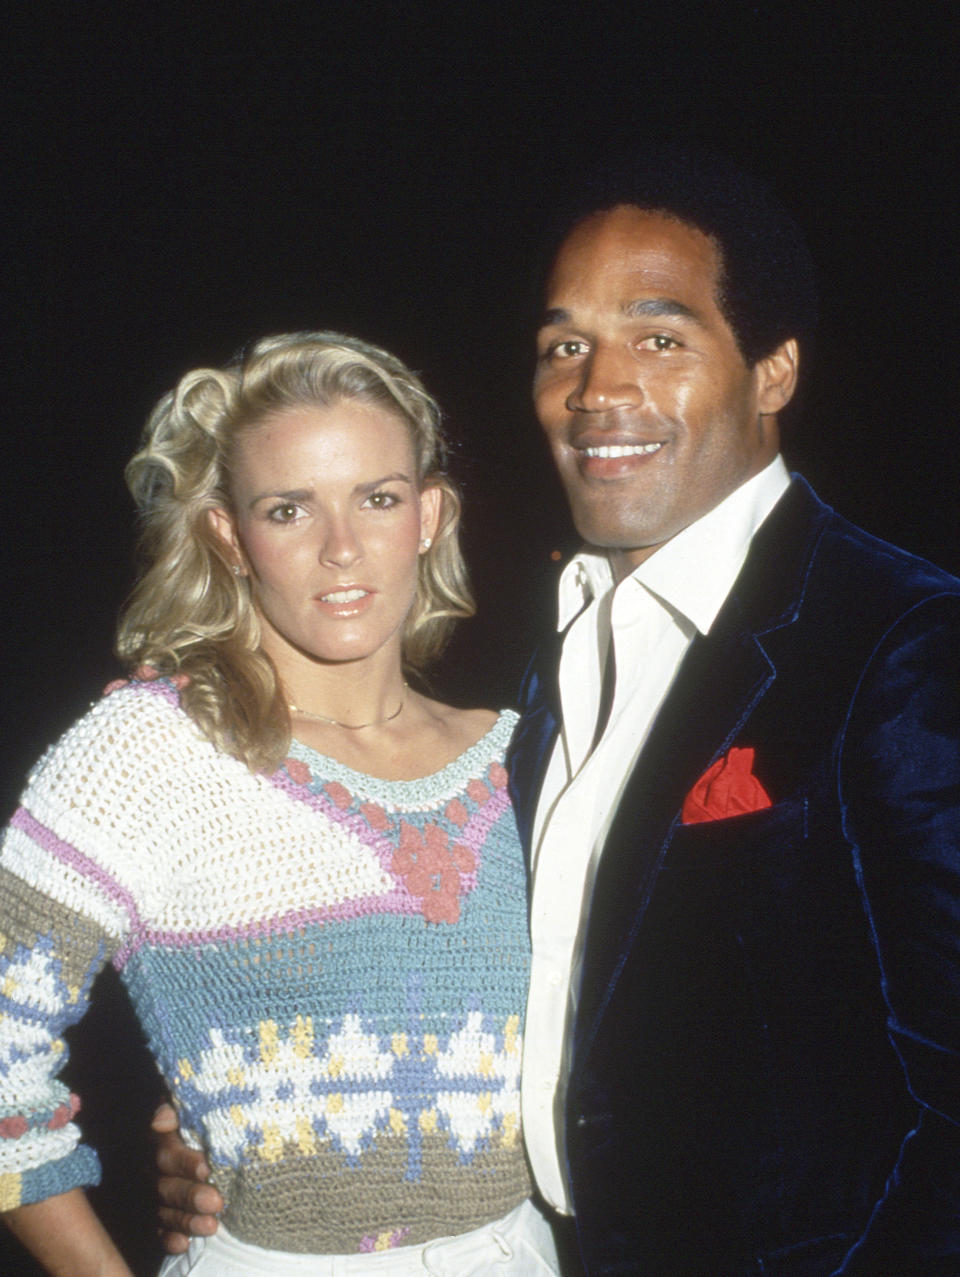 Nicole Brown Simpson and O.J. Simpson Circa 1980's Credit: Ralph Dominguez/MediaPunch /IPX